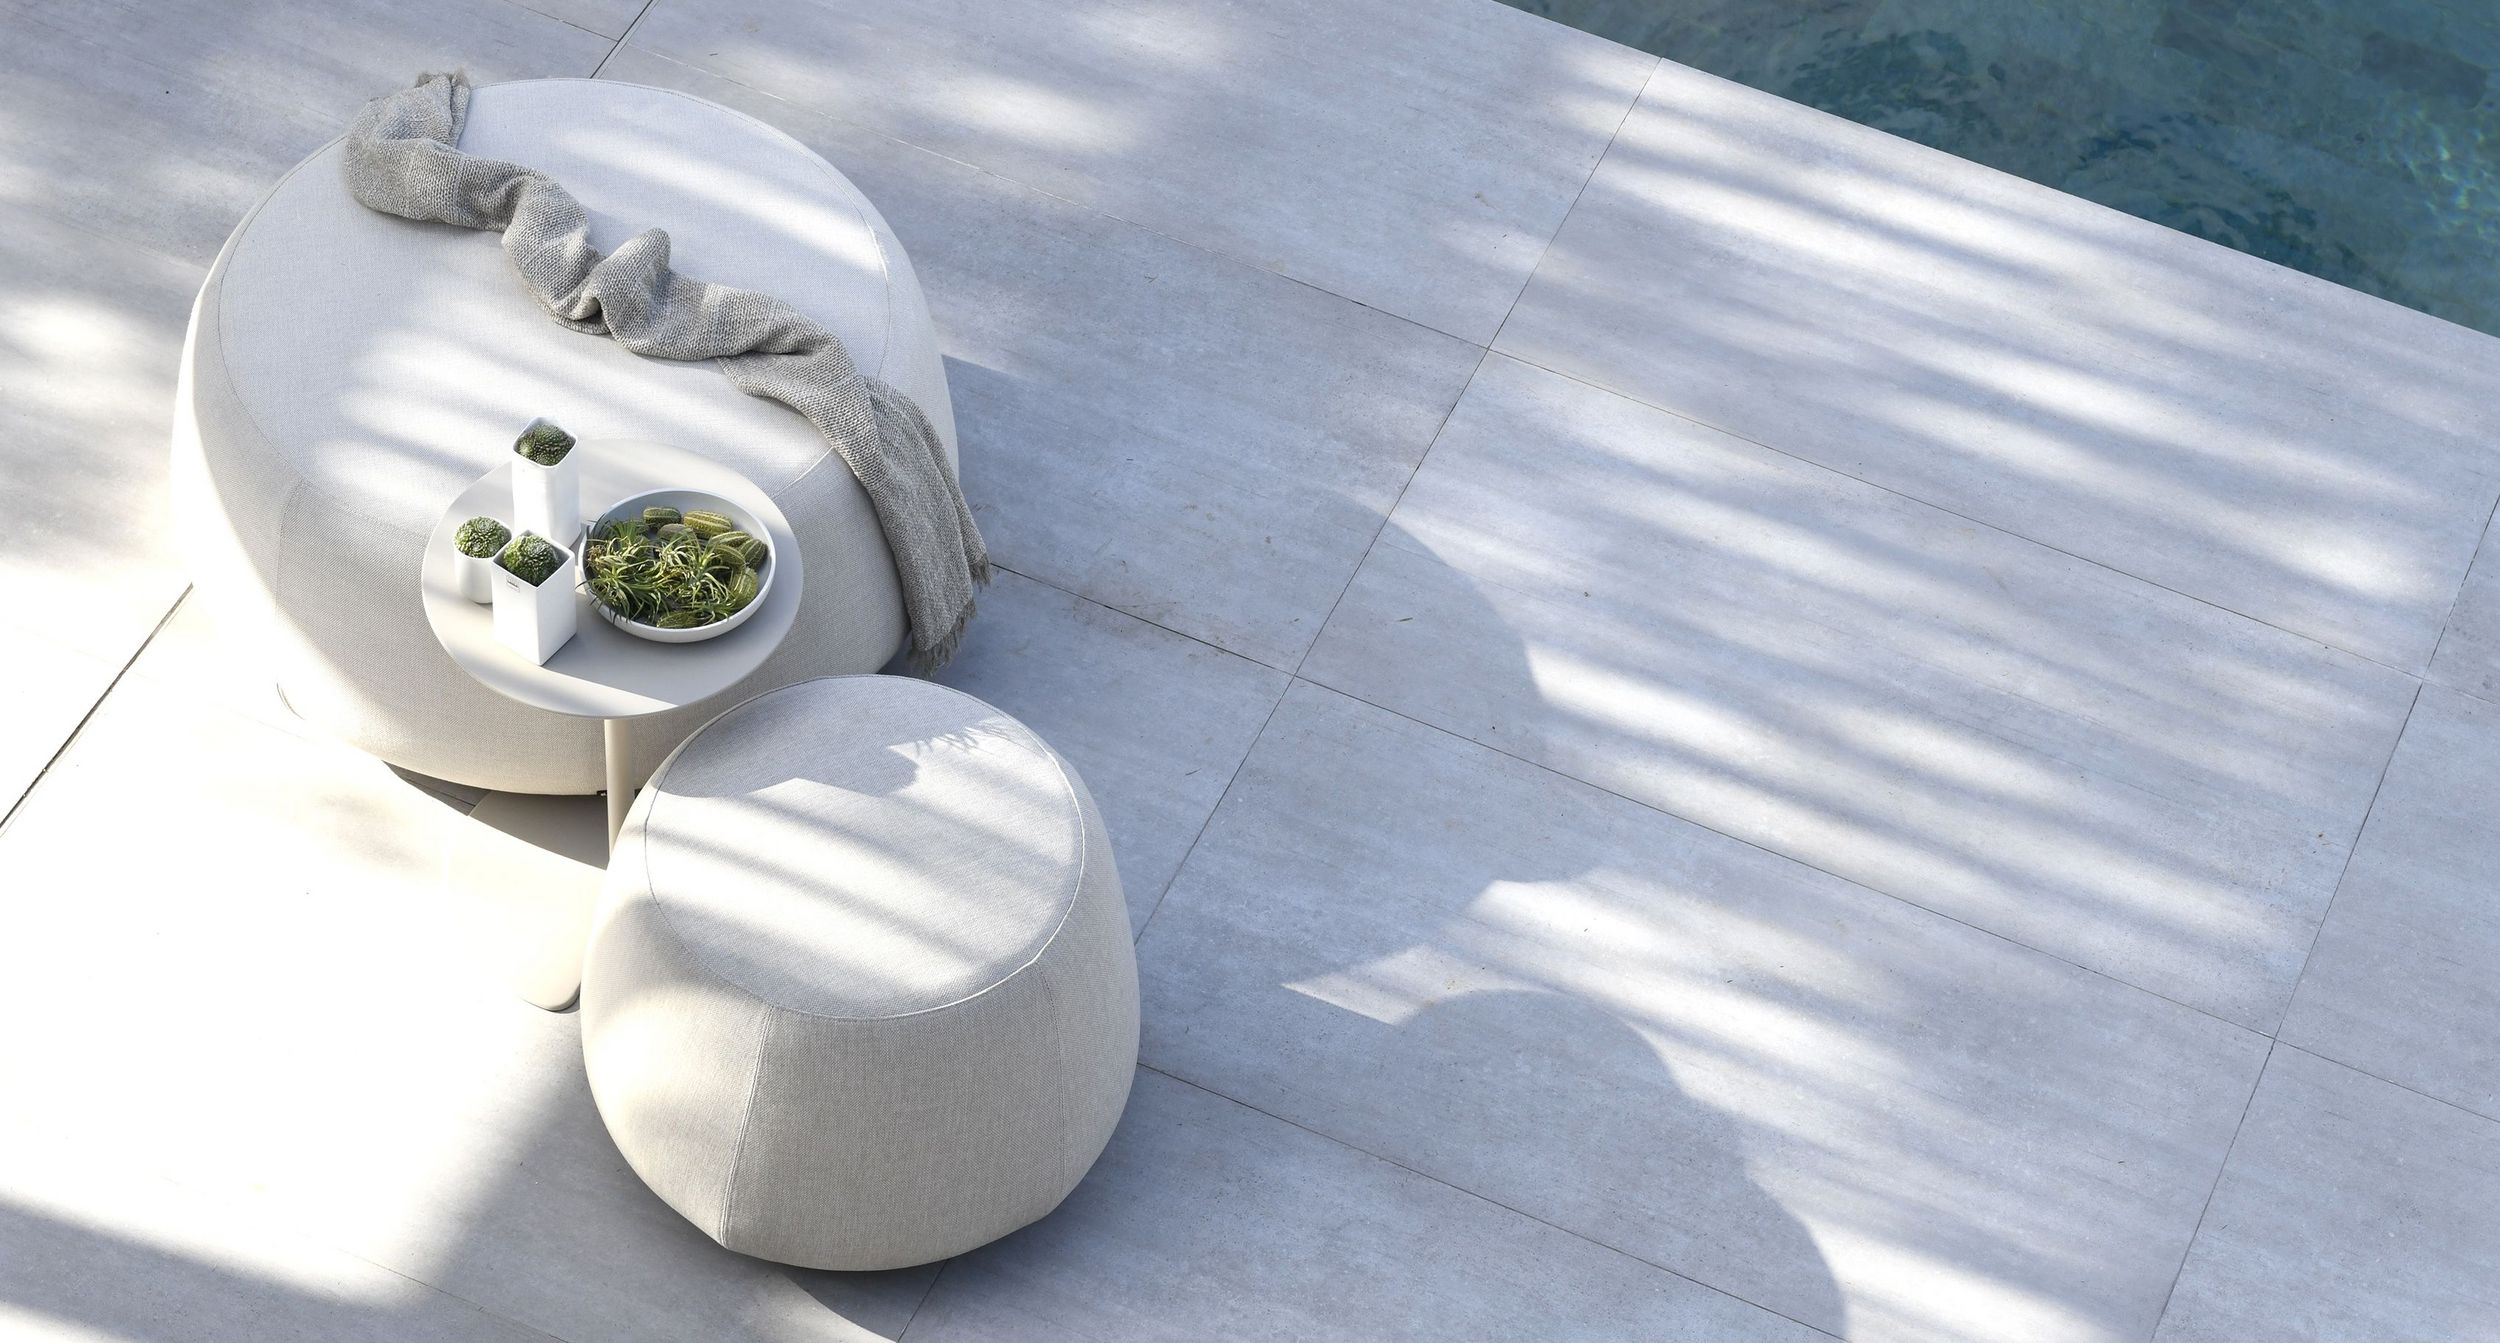 Nomad ottomans by Monica Armani for Tribù